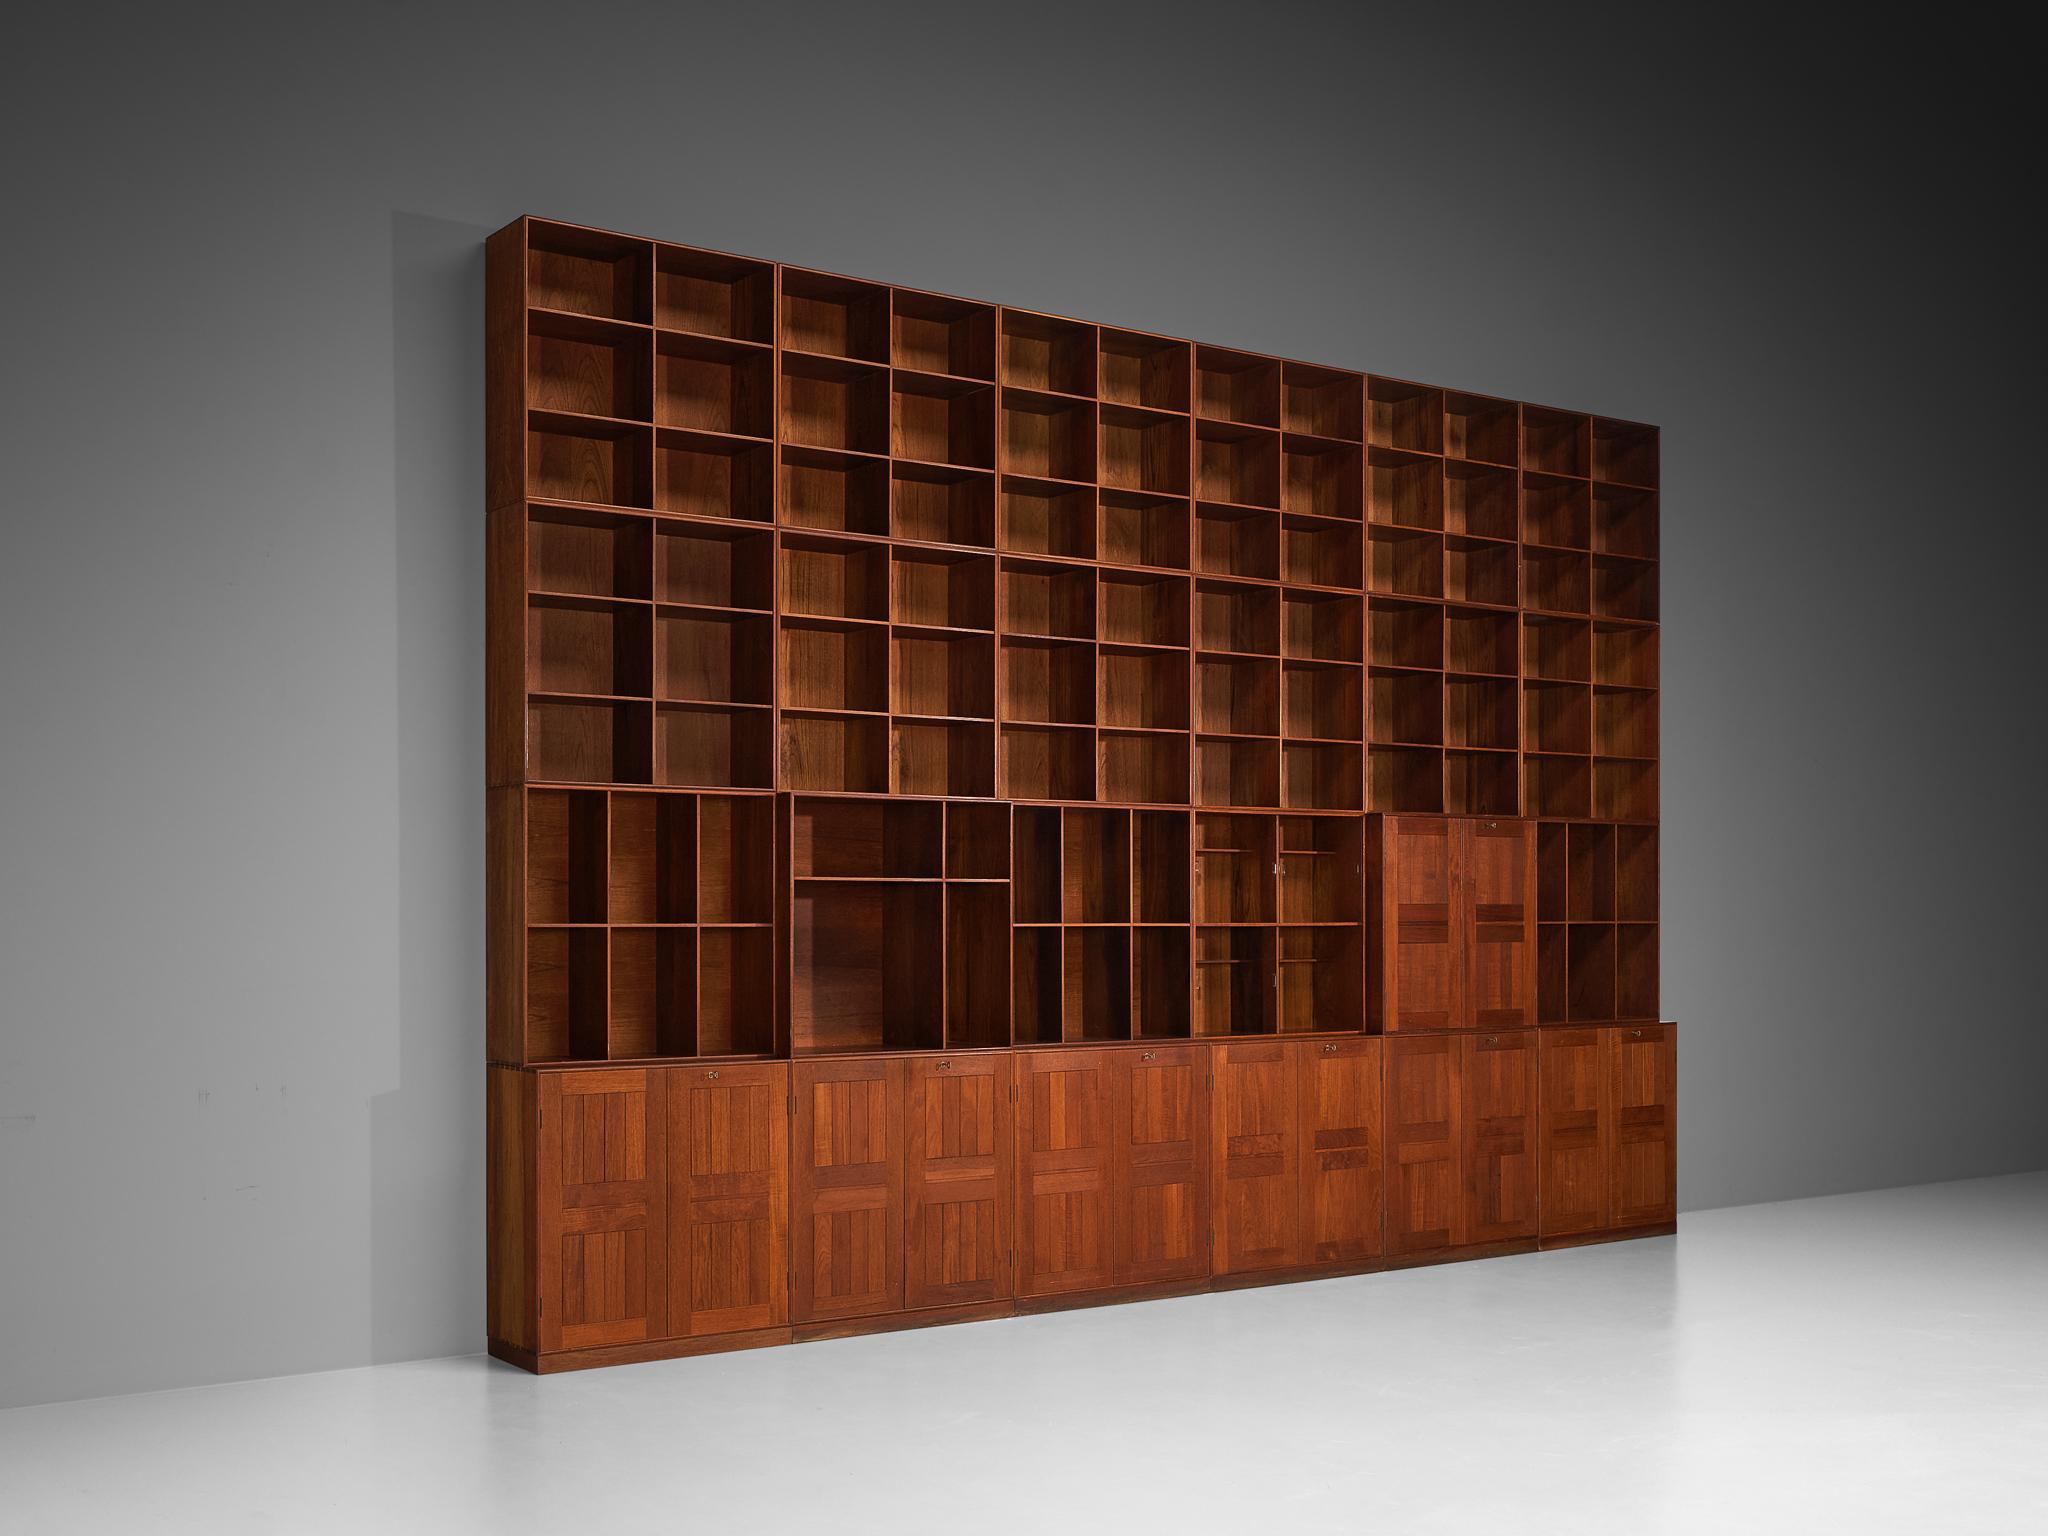 Mogens Koch for Rud Rasmussen, modular book case or library, mahogany, Denmark, 1950s

Intriguing and substantial modular library by Danish designer Mogens Koch. This piece is constructed from different elements to form this great wall unit or